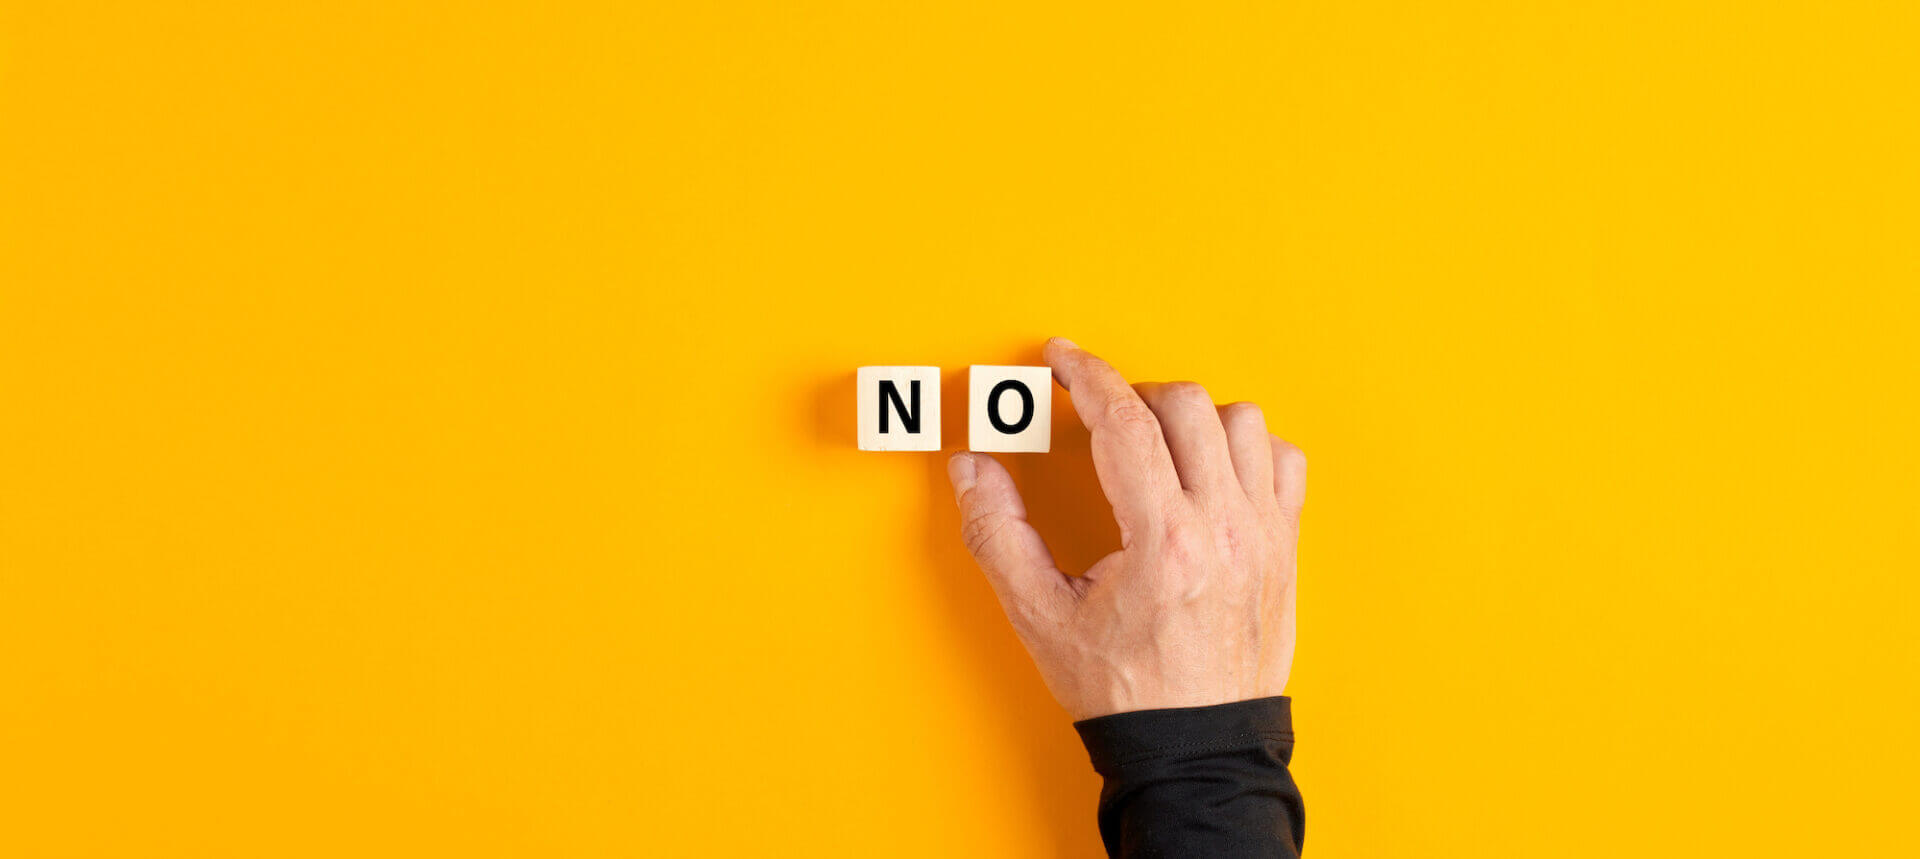 The Power (and Art) of Saying “No”